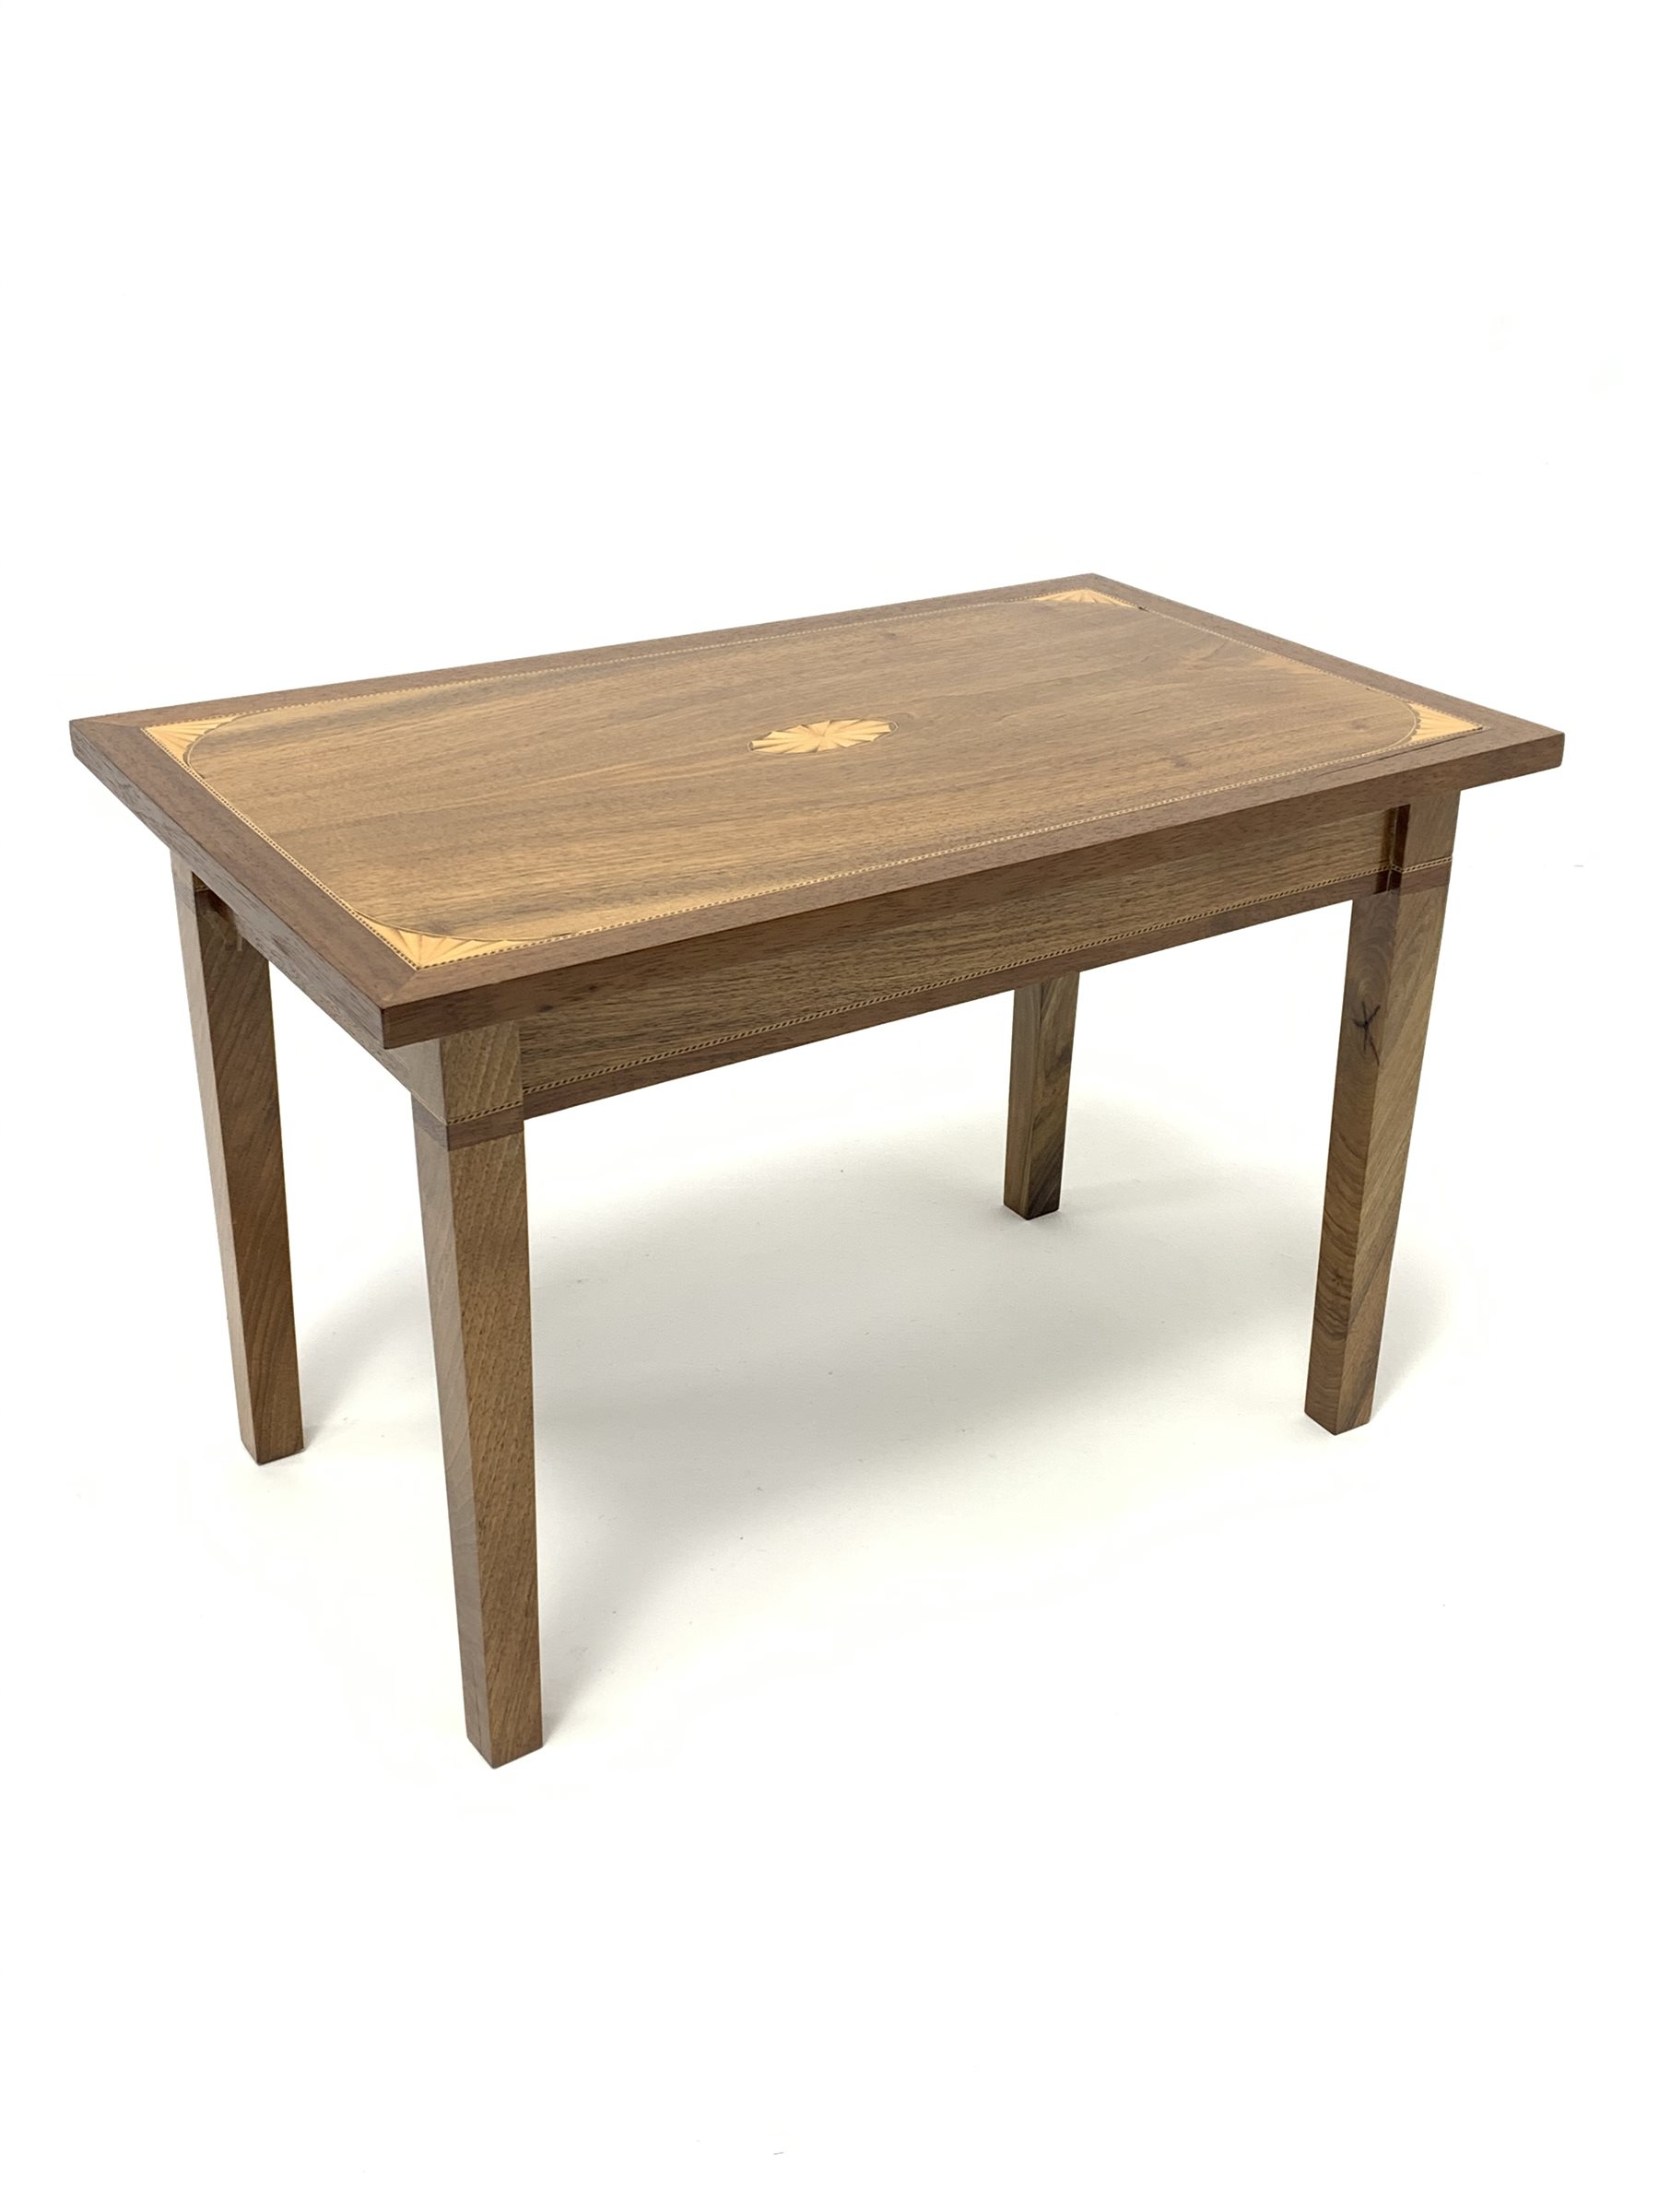 20th century walnut coffee table, rectangular top with fan inlaid spandrels, on square supports, 45c